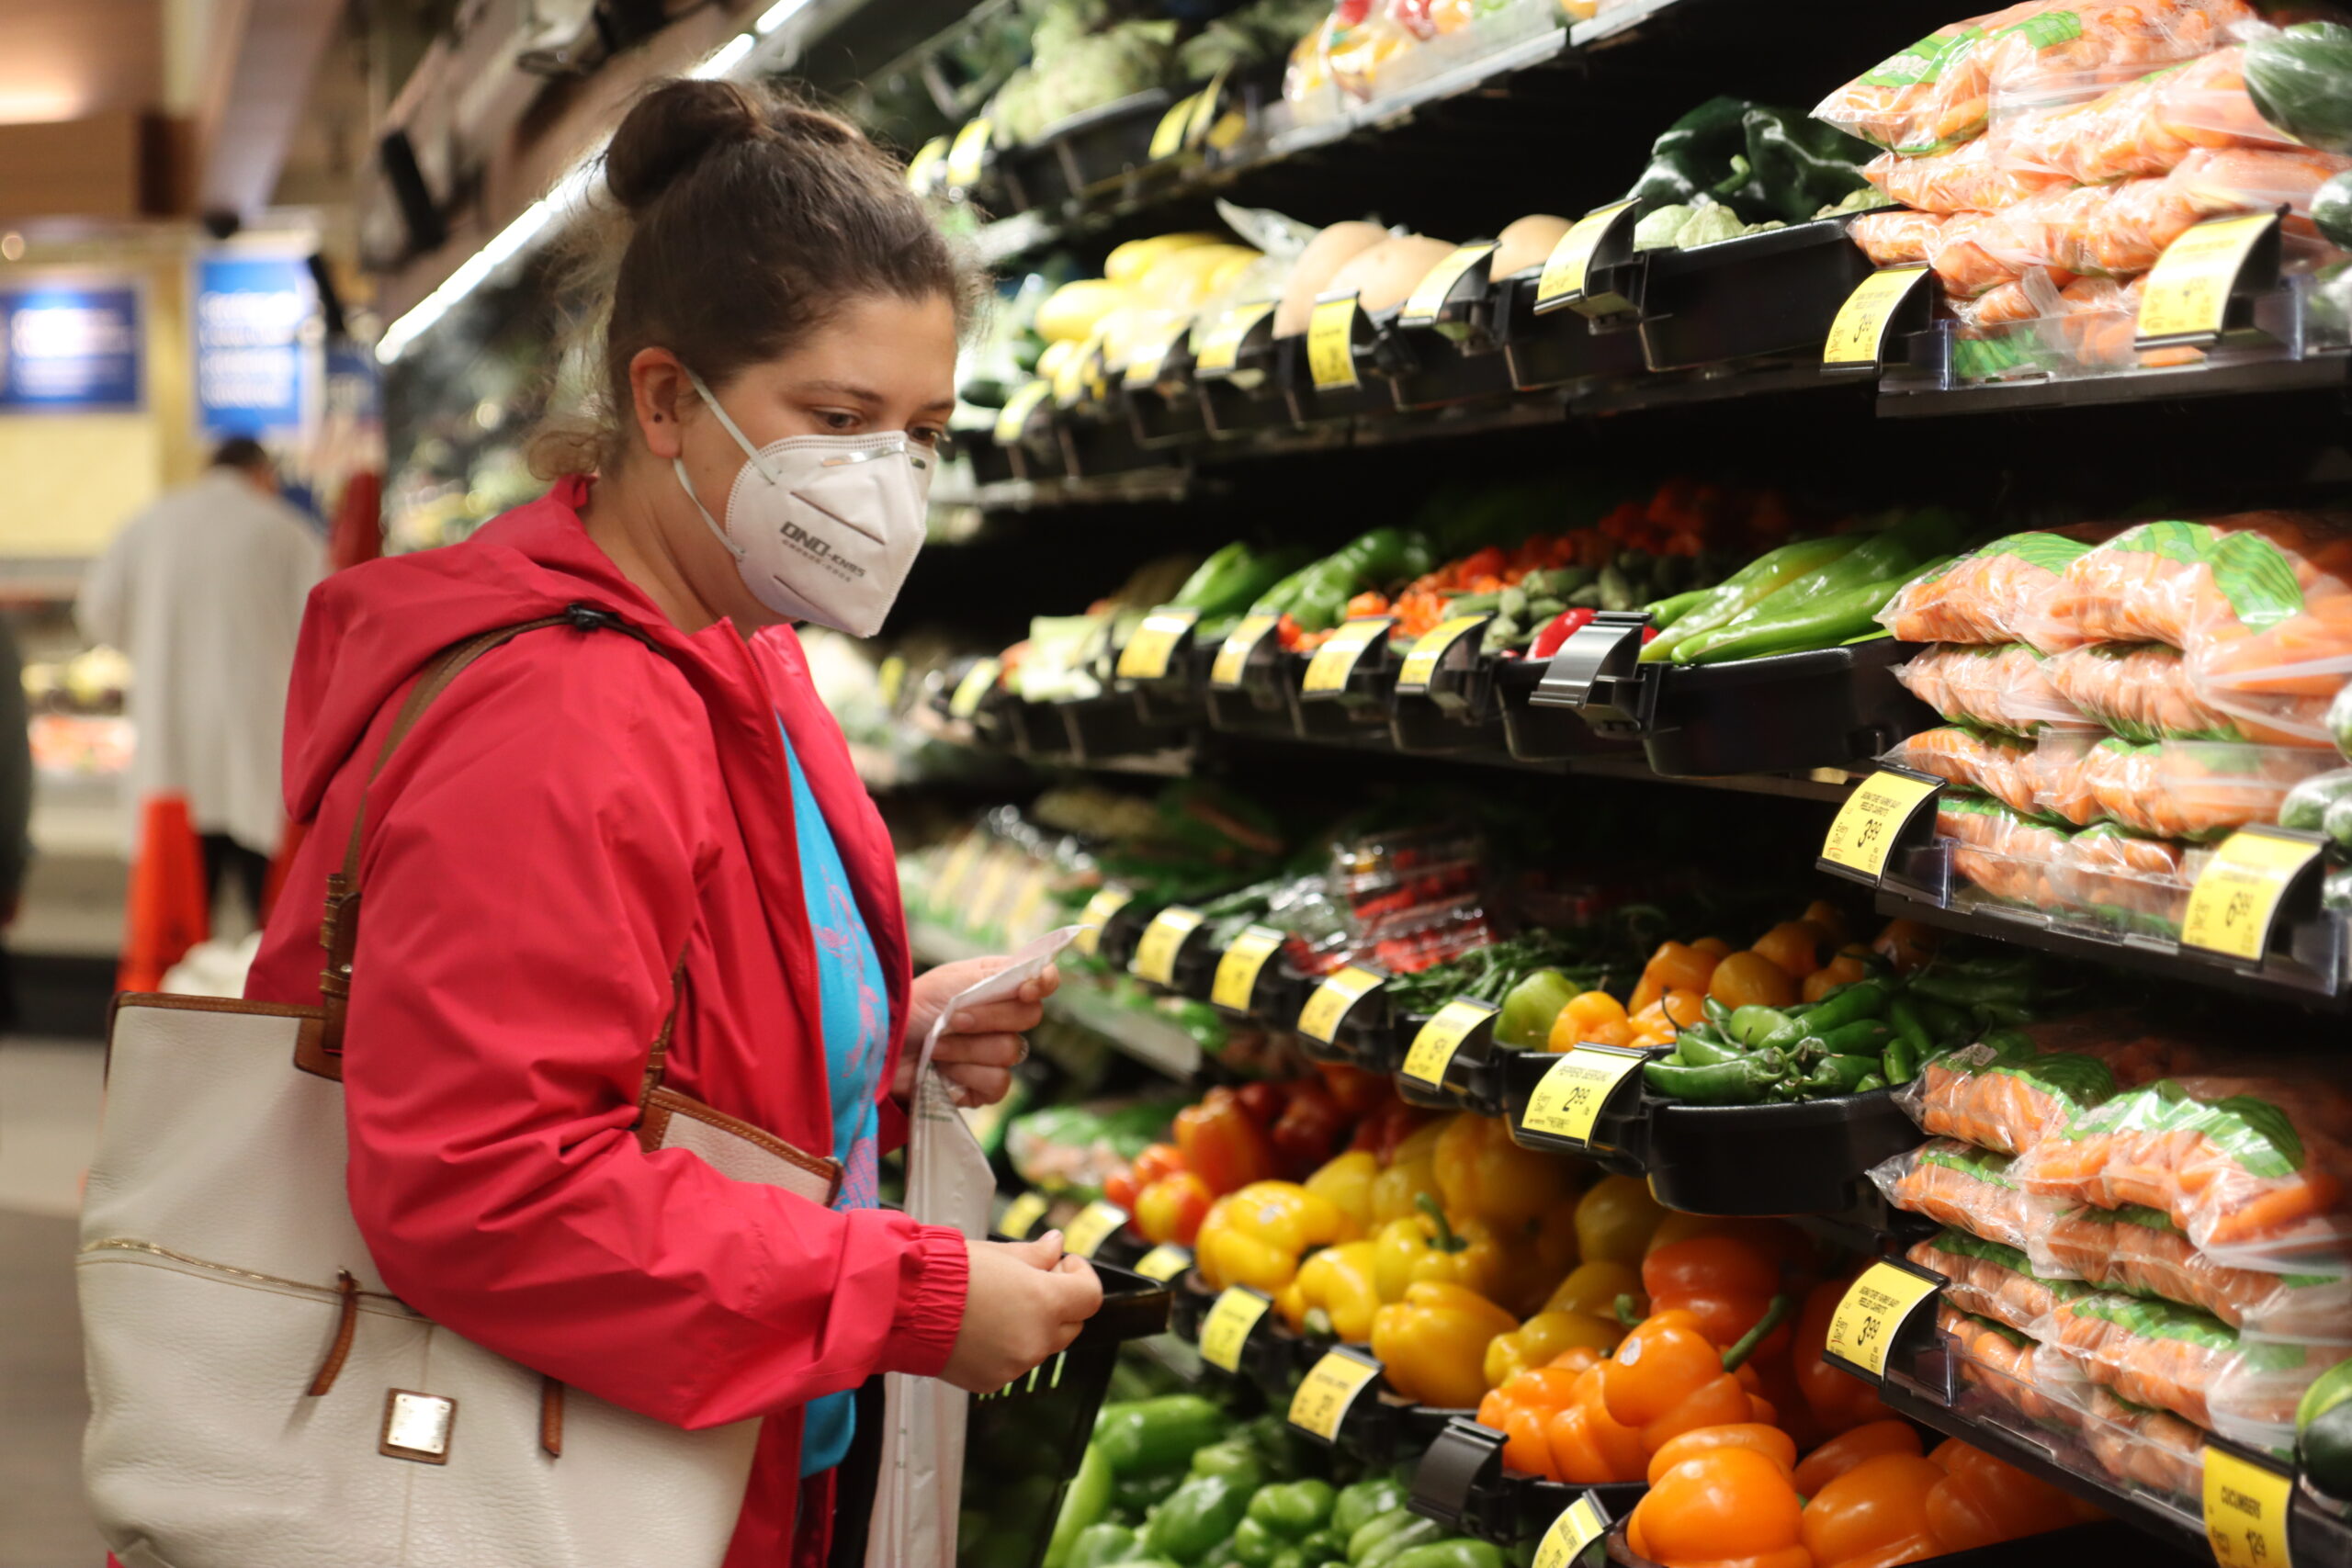 A woman in a pink jacket holds a plastic bag in front of produce shelves at a grocery store.